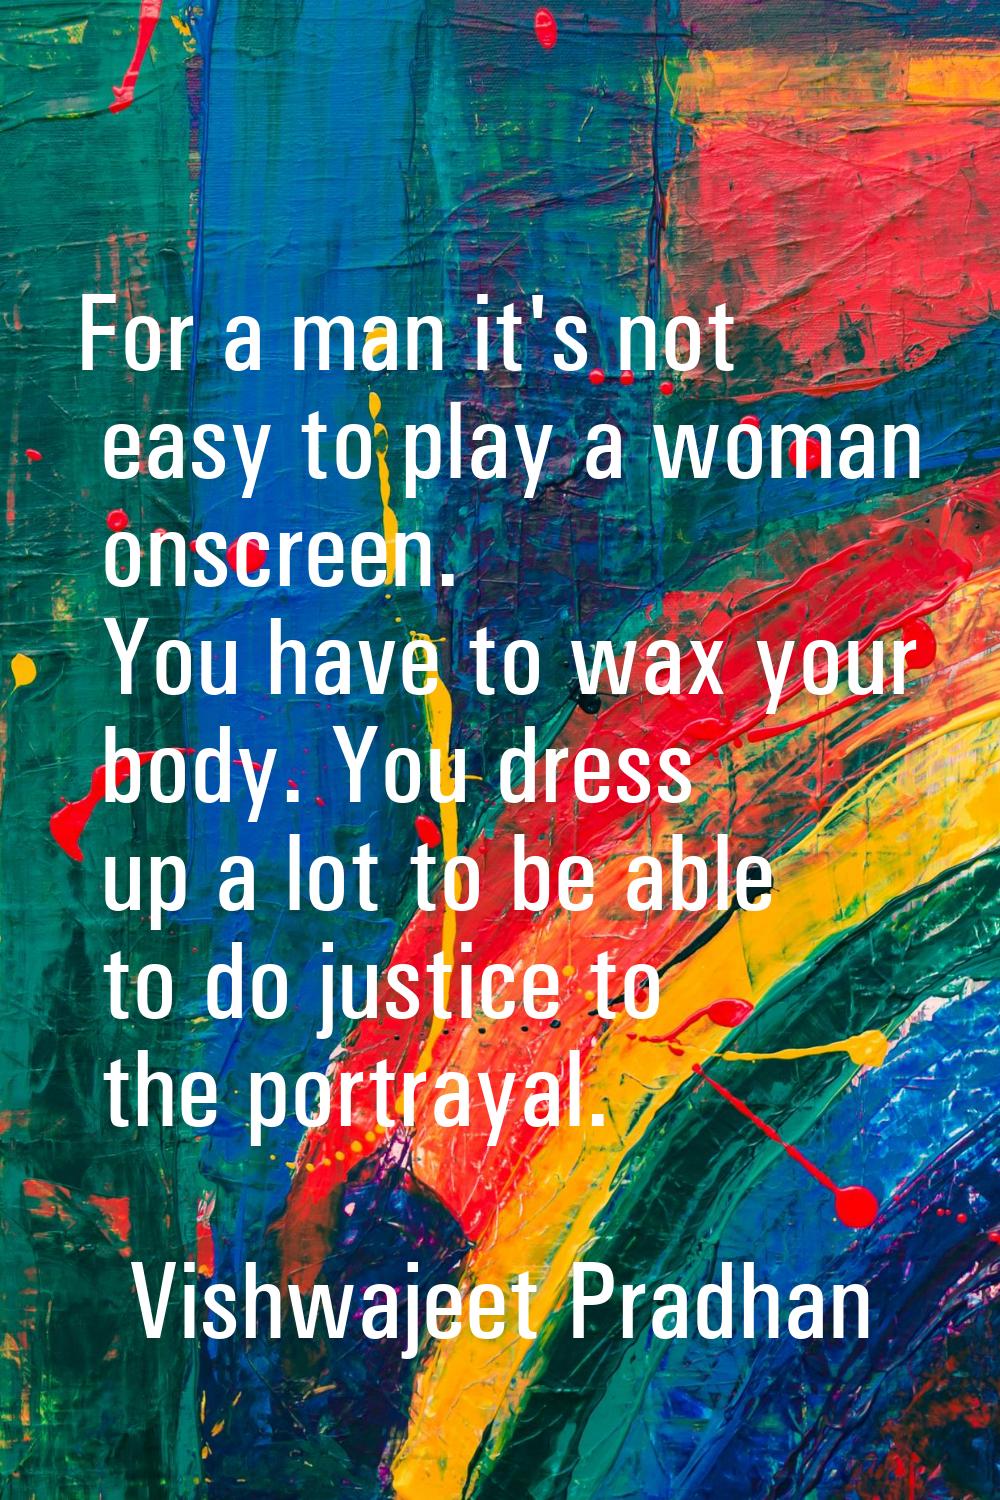 For a man it's not easy to play a woman onscreen. You have to wax your body. You dress up a lot to 